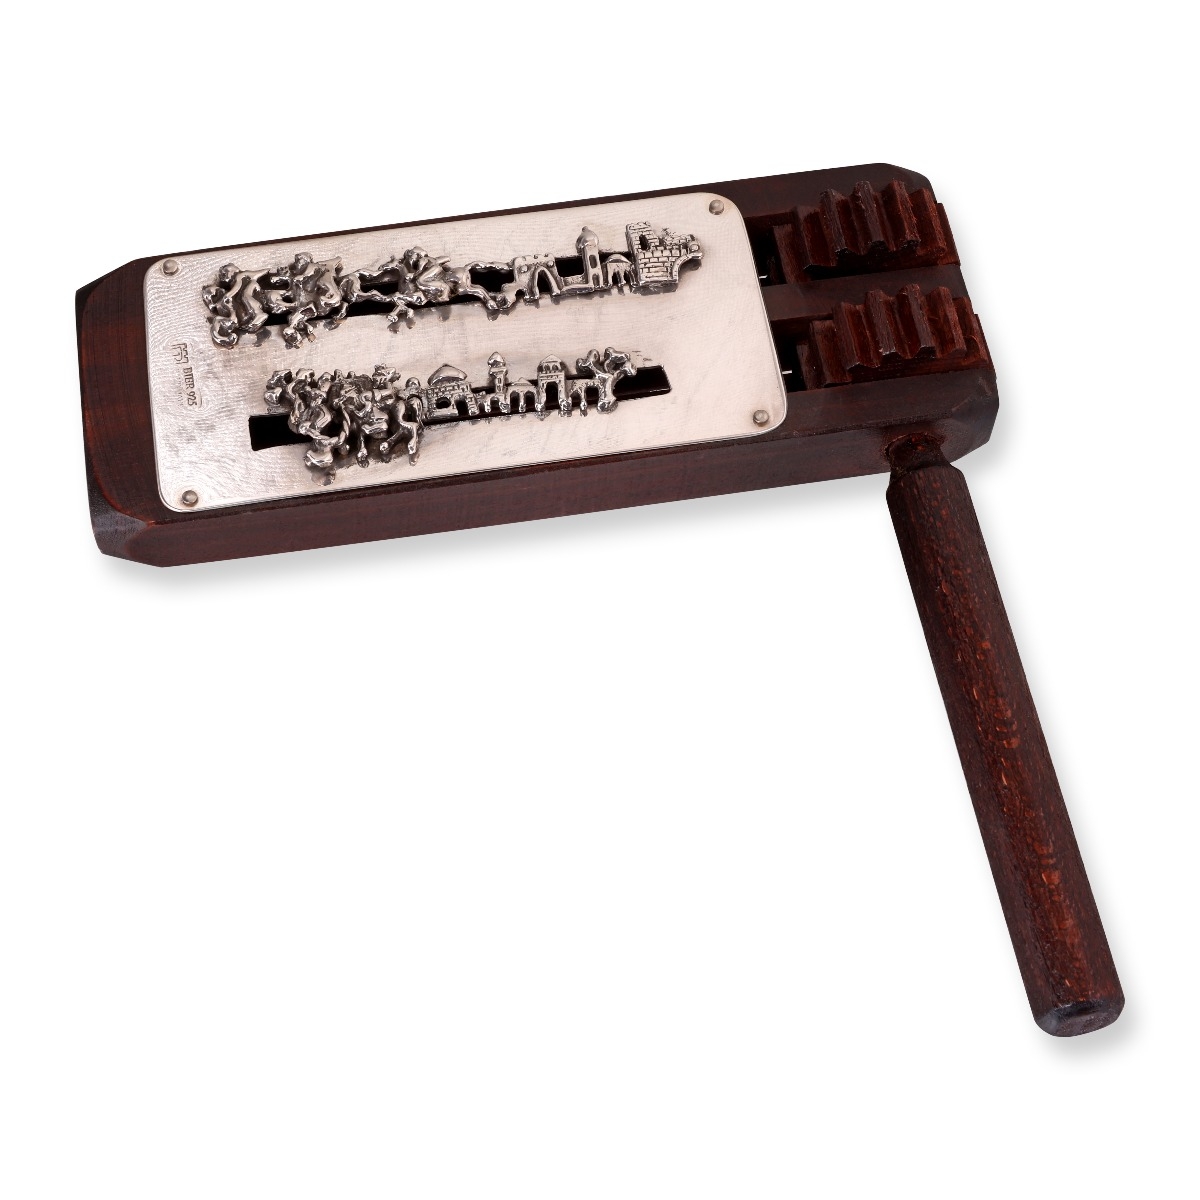 Bier Judaica Wooden Purim Grogger (Noisemaker) With 925 Sterling Silver Decorative Plate (Brown) - 1